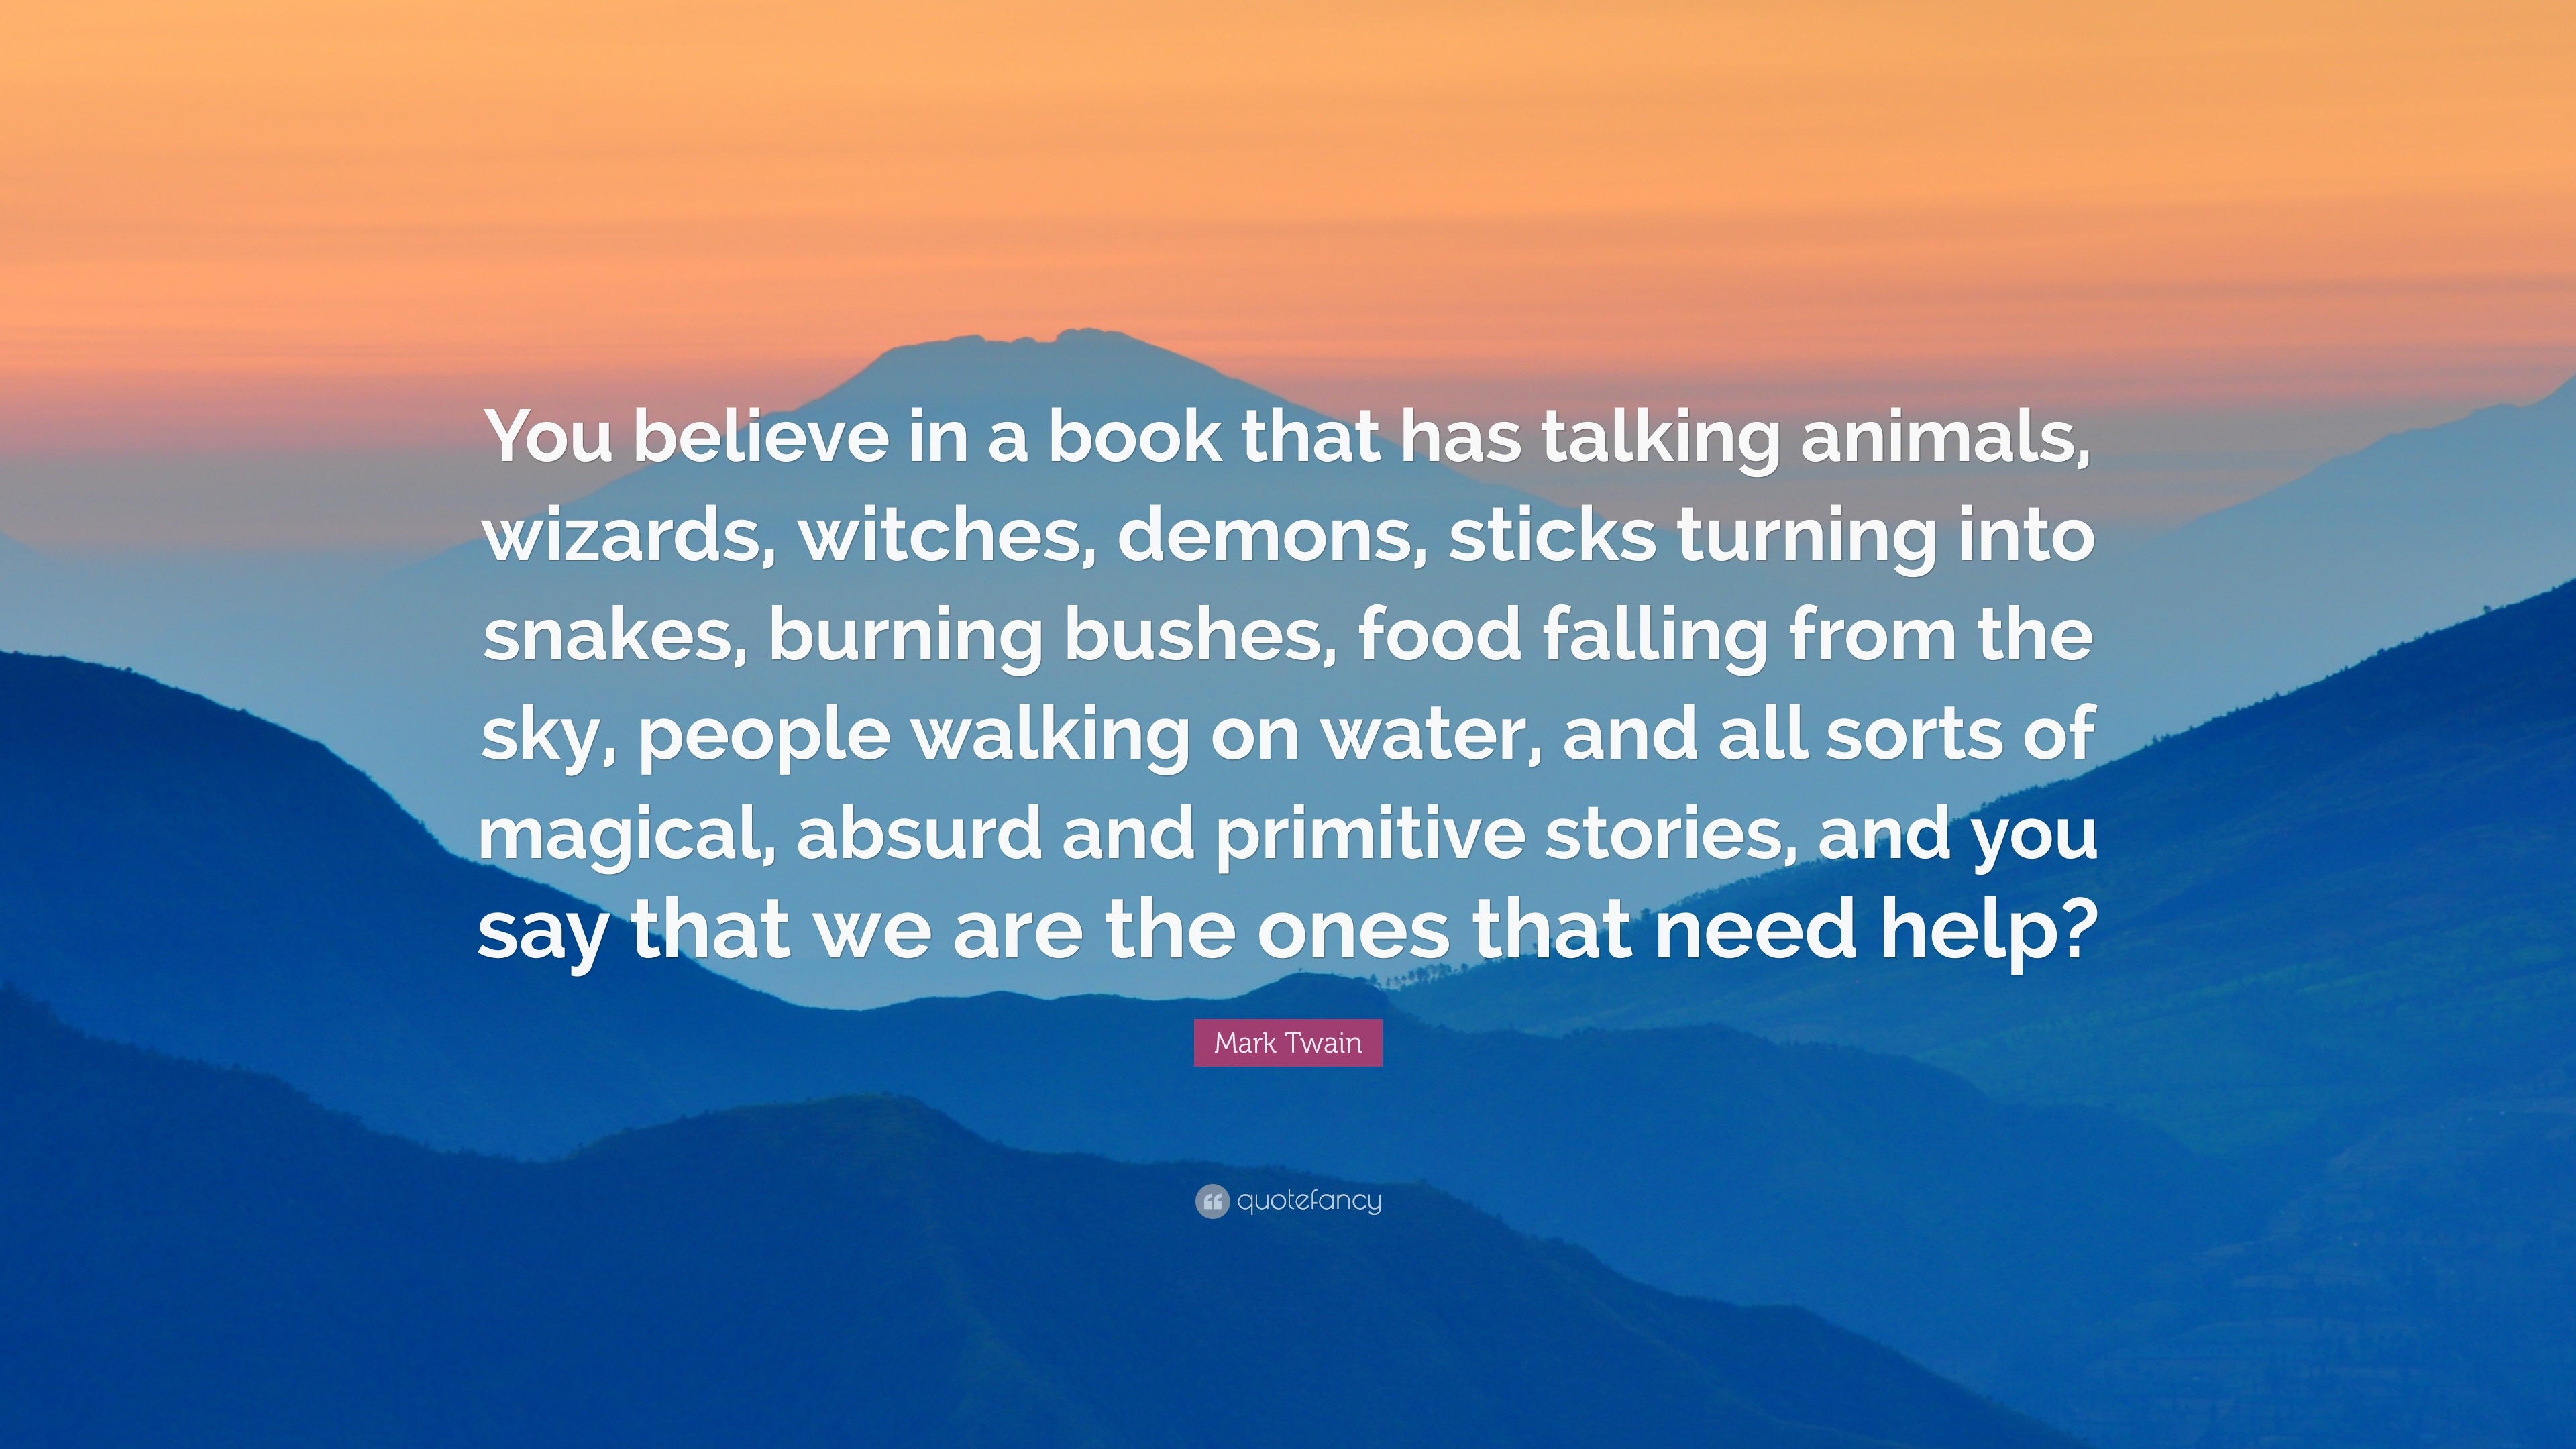 Mark Twain Quote: “You believe in a book that has talking animals, wizards,  witches, demons, sticks turning into snakes, burning bushes, fo...”